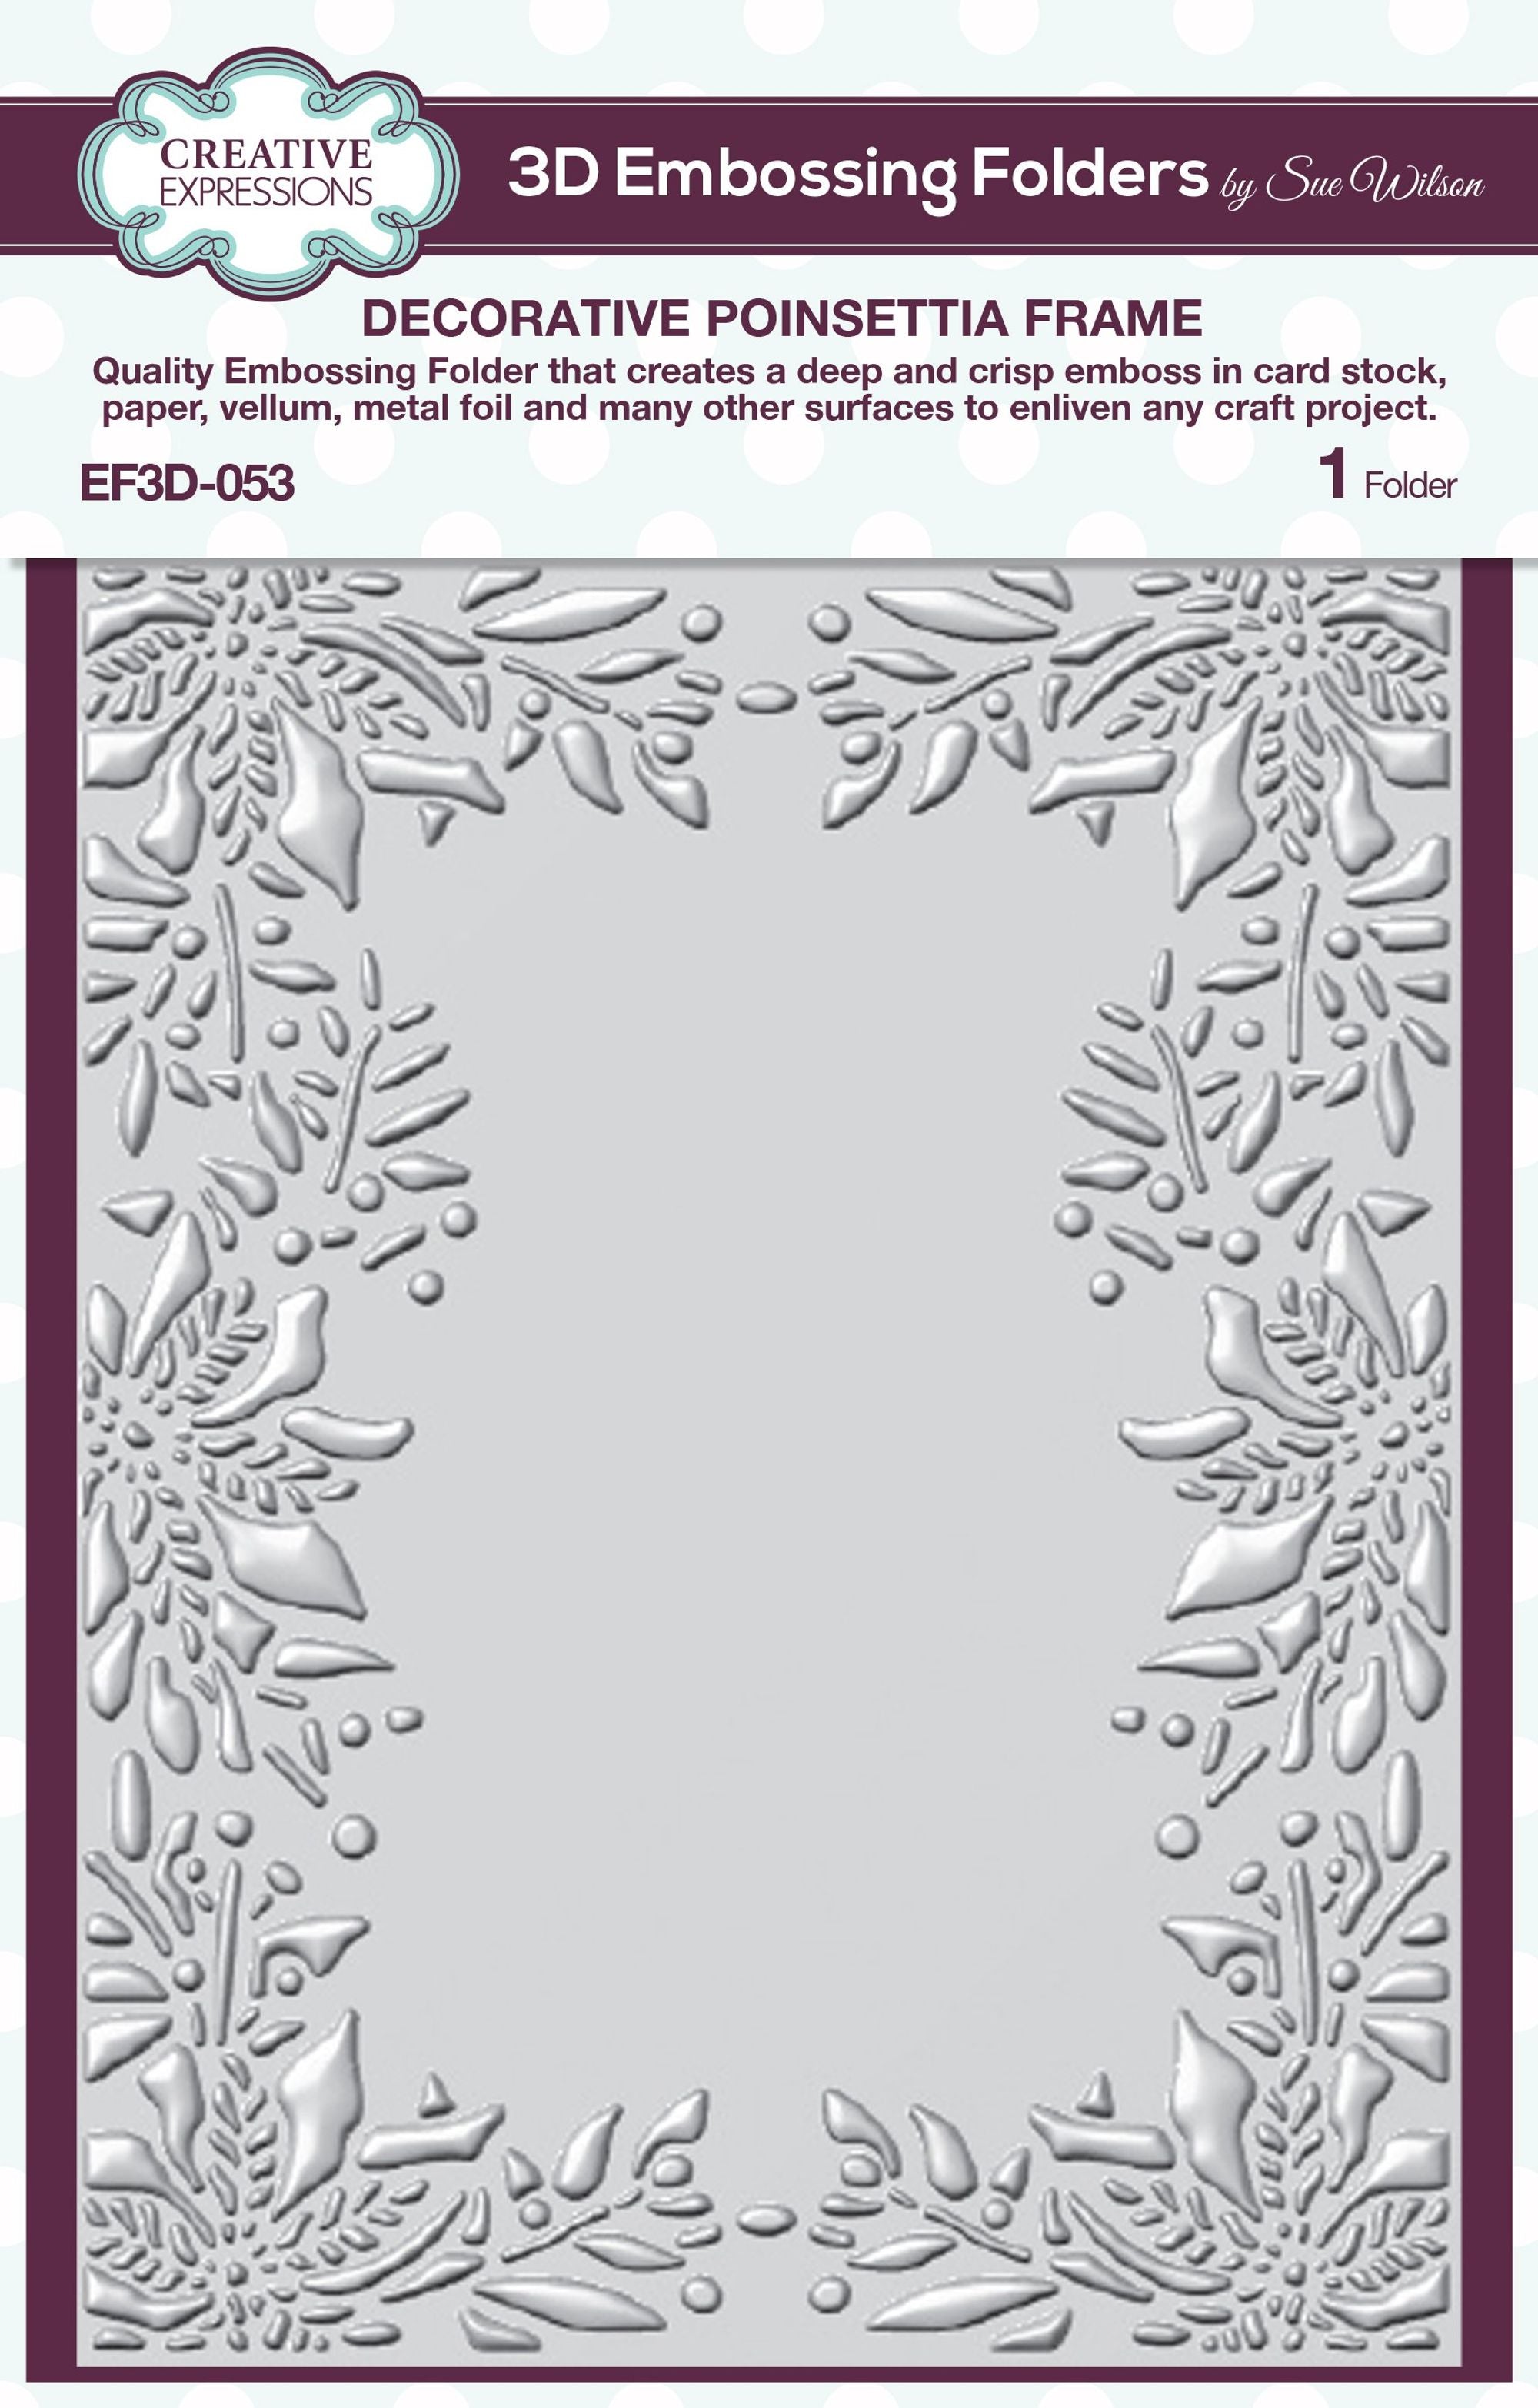 Creative Expressions 3D Embossing Folders & Matching Stencils Set